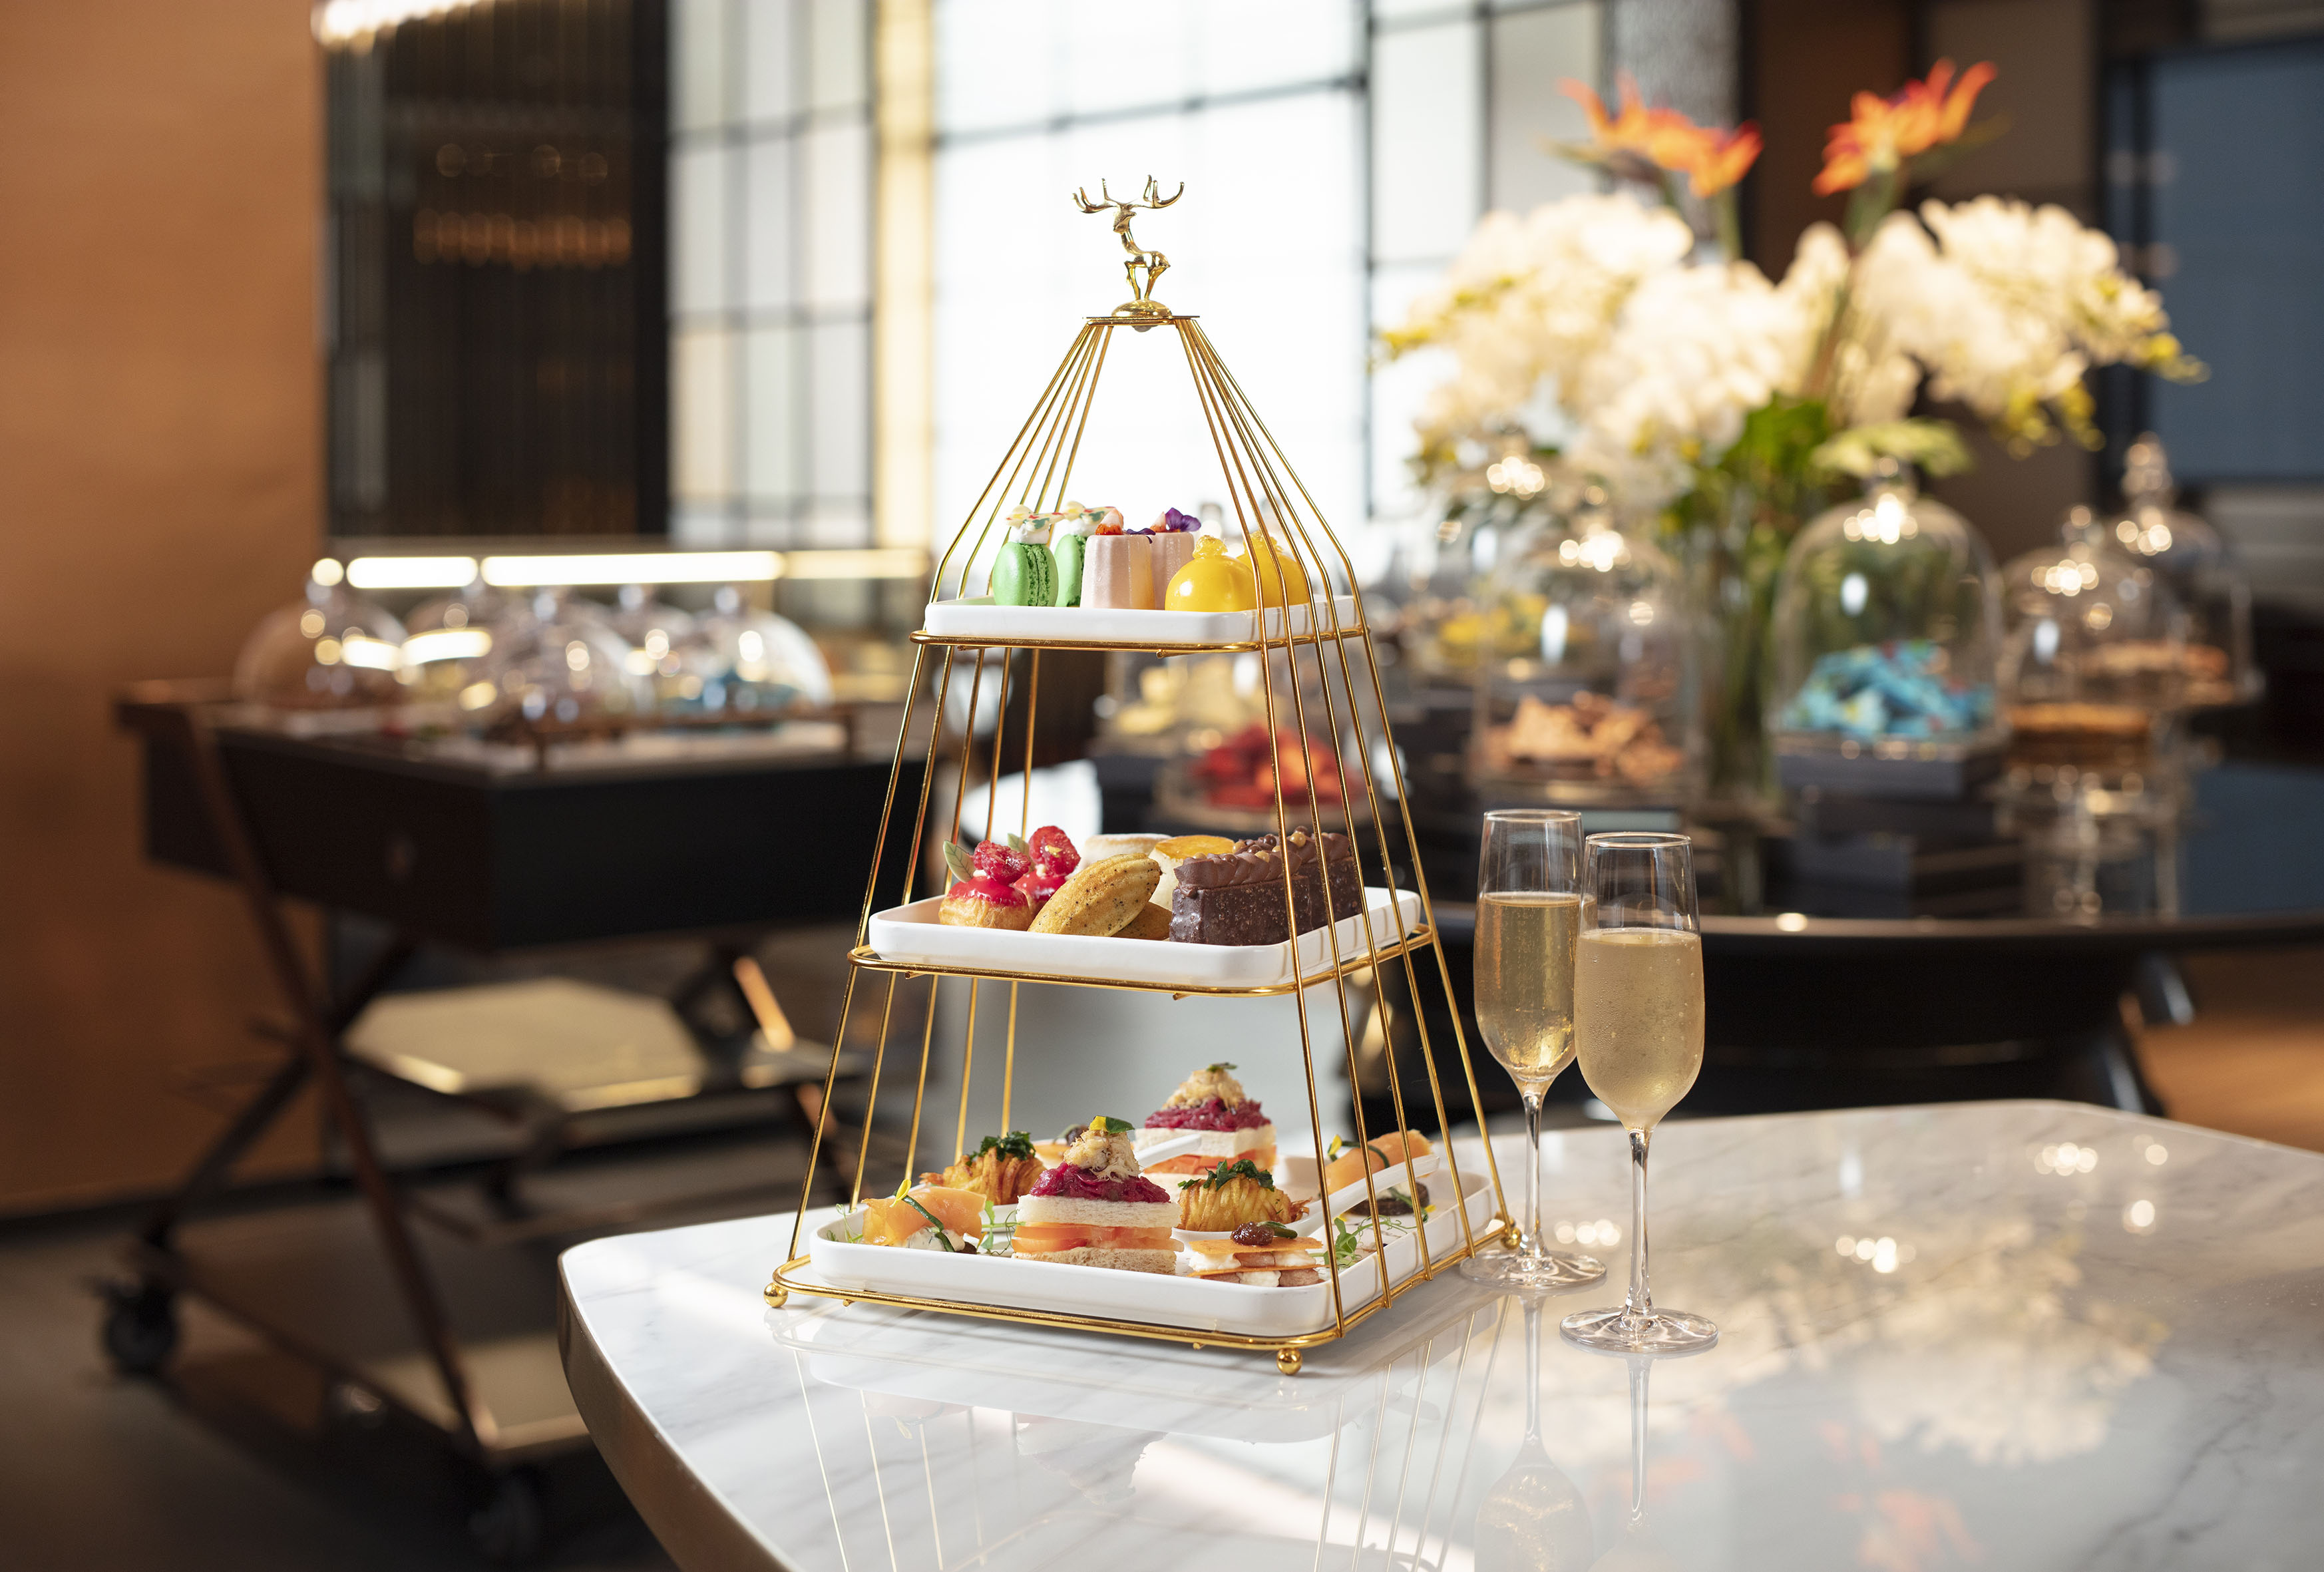 Afternoon tea with champagne at SAVVY